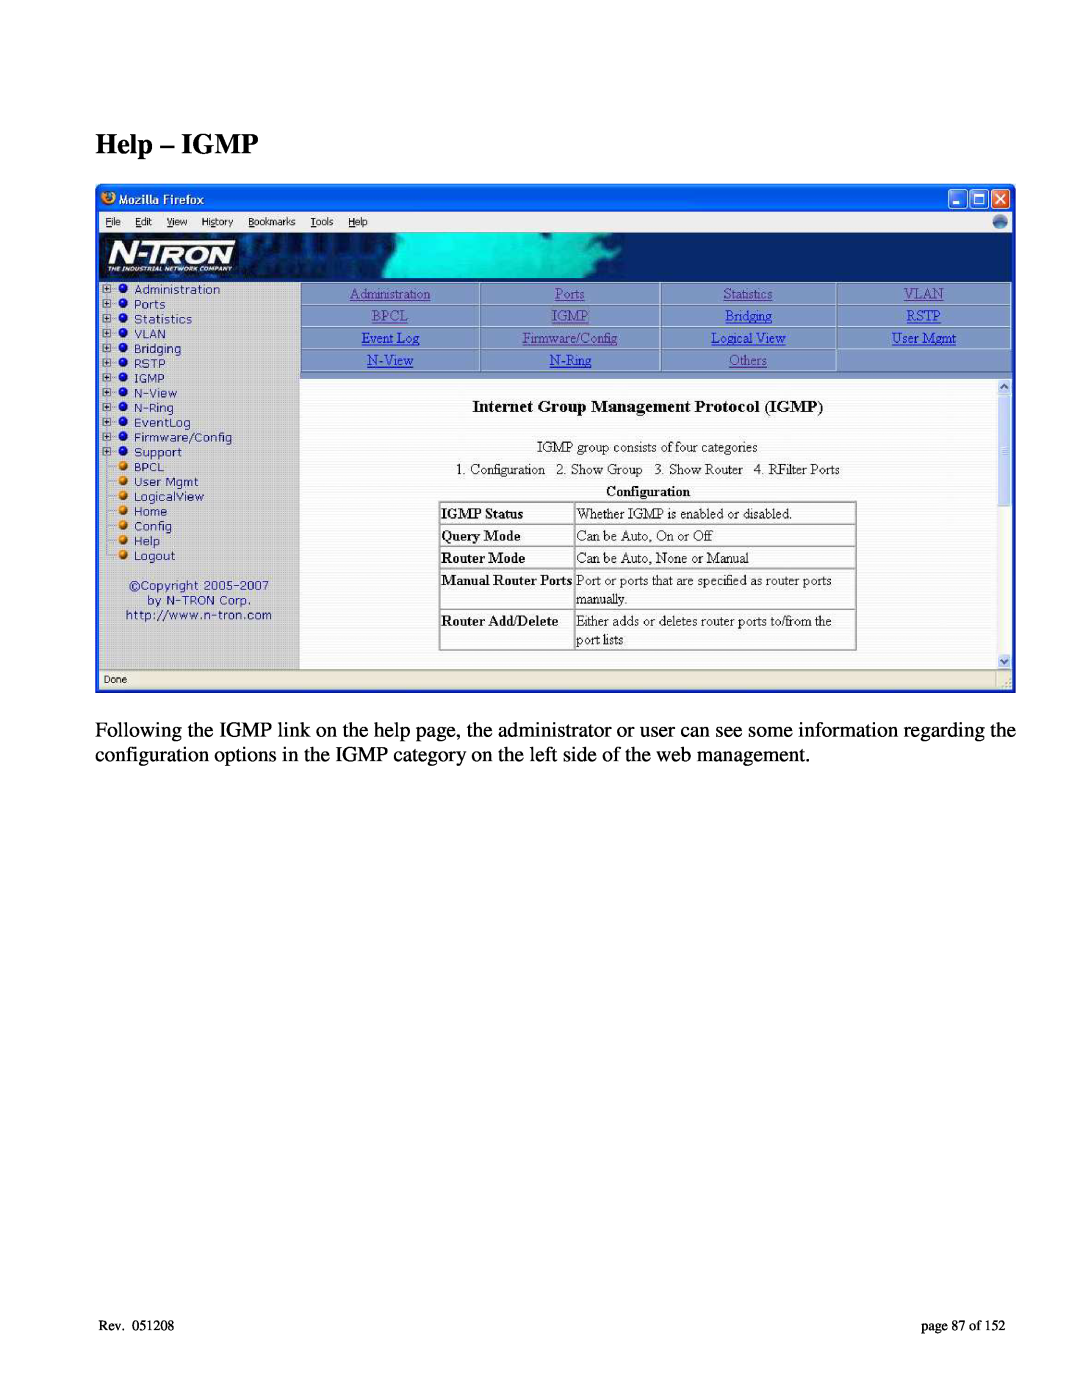 Gigabyte 7014 user manual Help - IGMP, page 87 of 